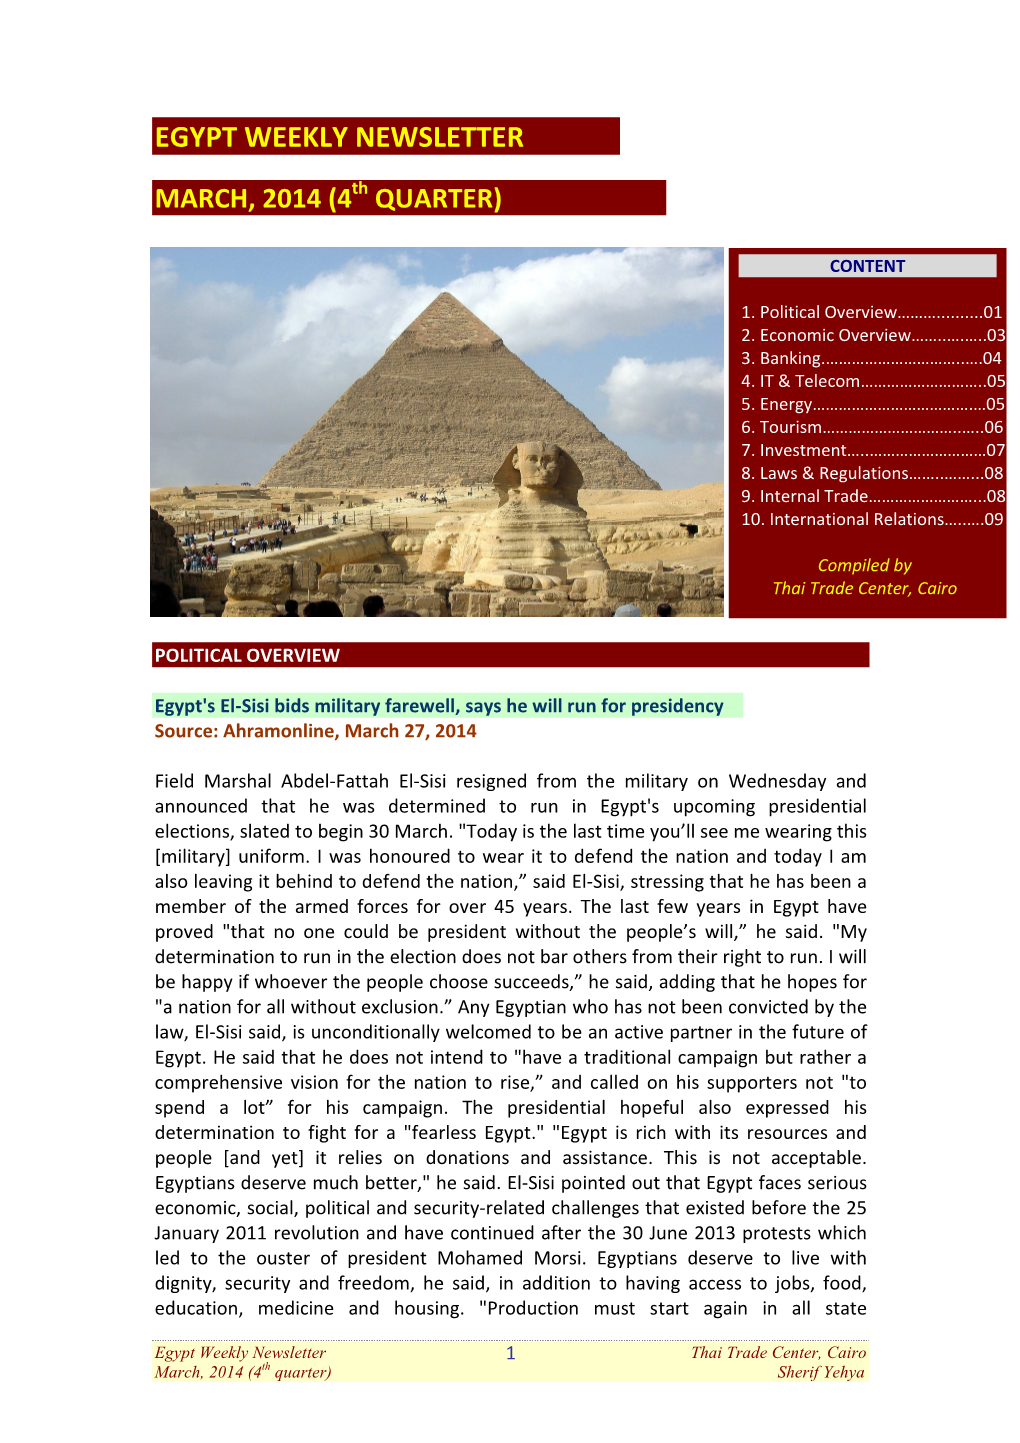 Egypt Weekly Newsletter March 2014, 4Th Quarter